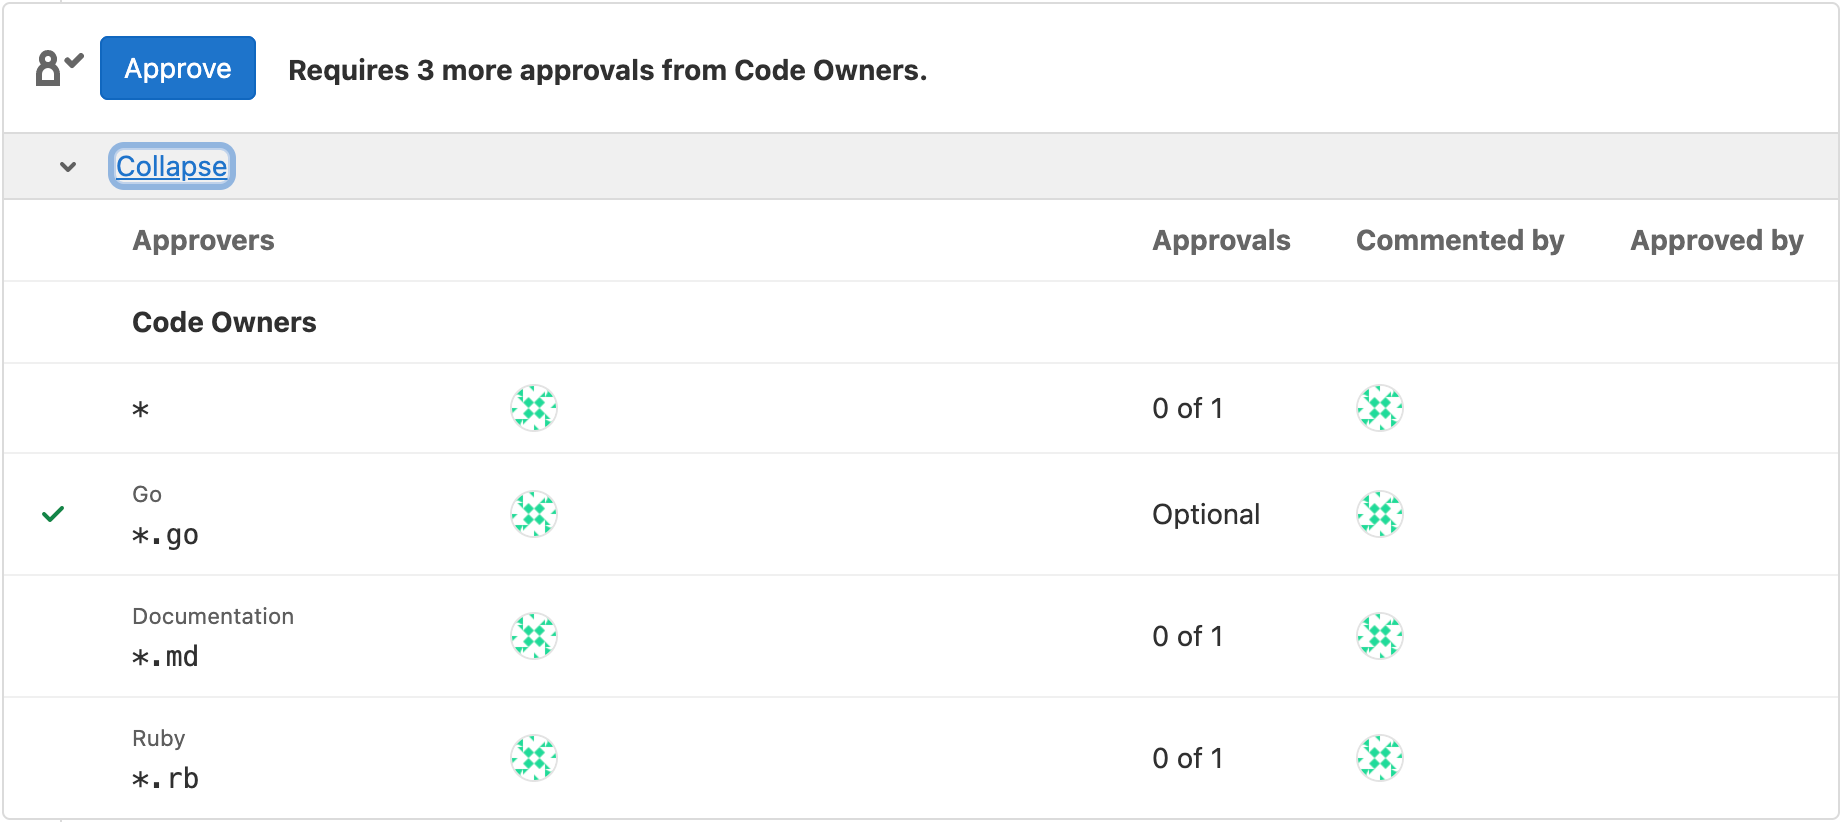 Code Owners approvals